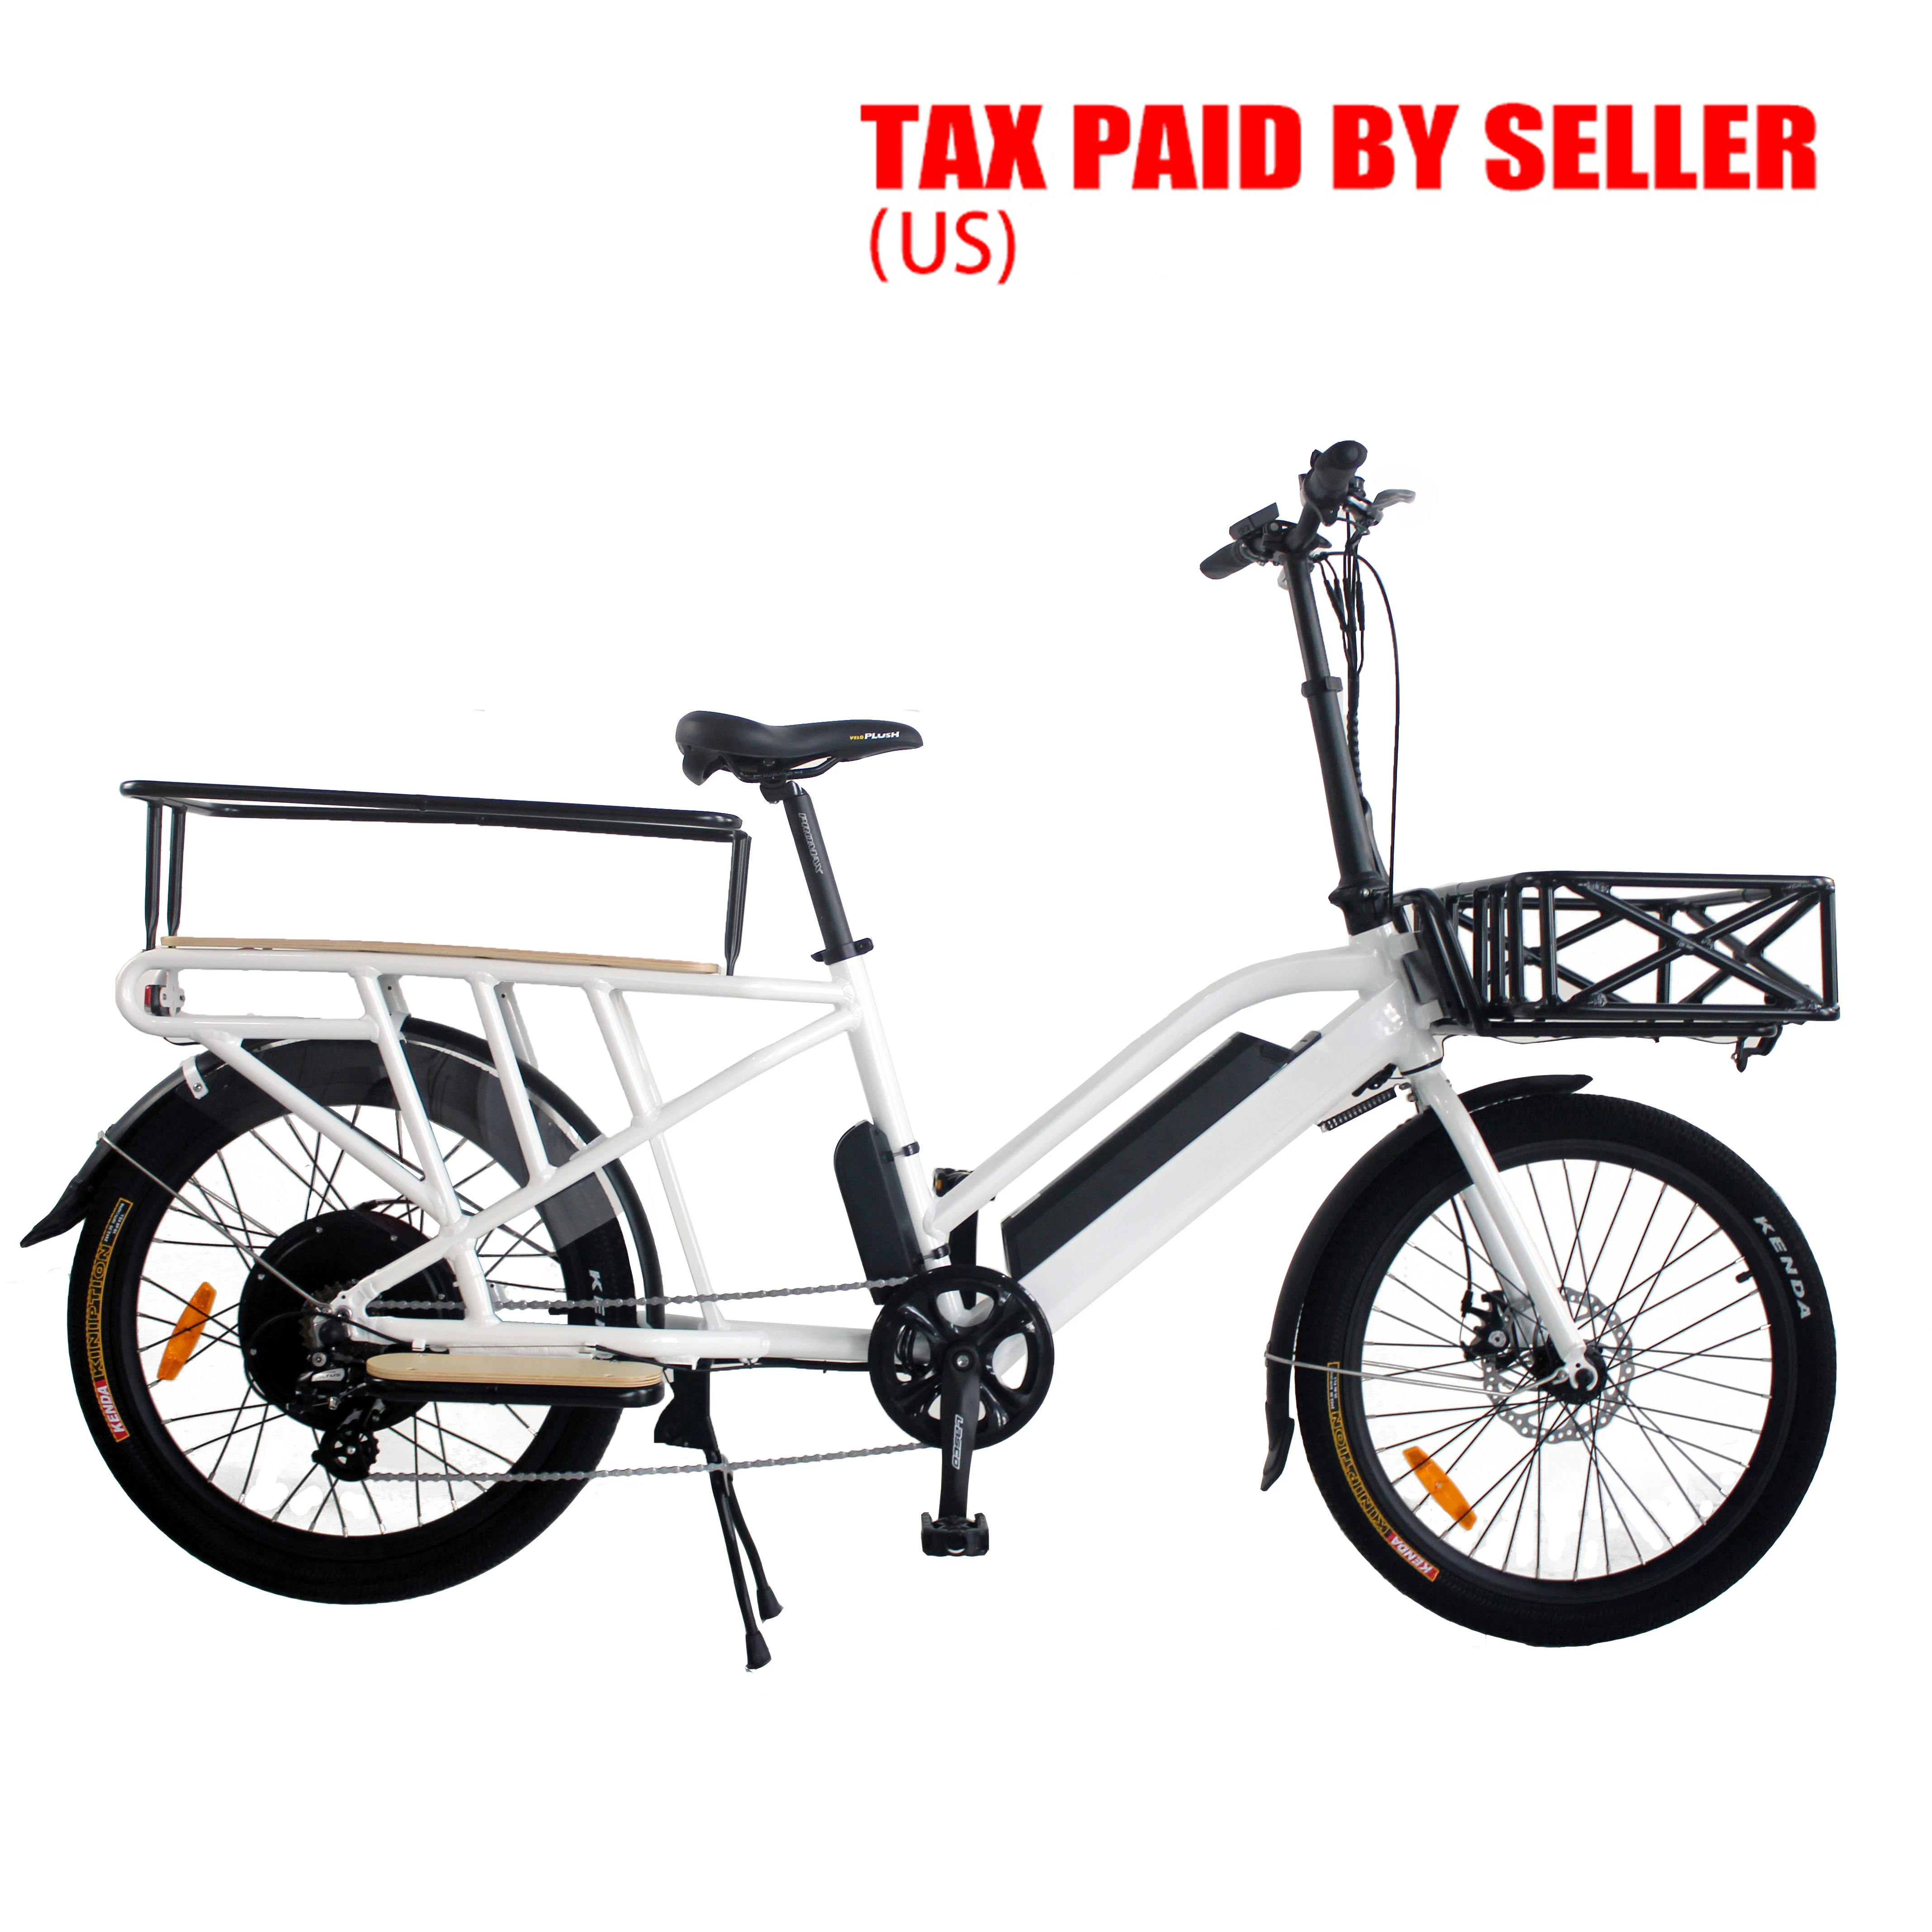 Cheap EUNORAU 24inch 48V750W Cargo Ebike with Rear Hub motor&500C Colorful Display for family or UberEats delivery/uberEats 0